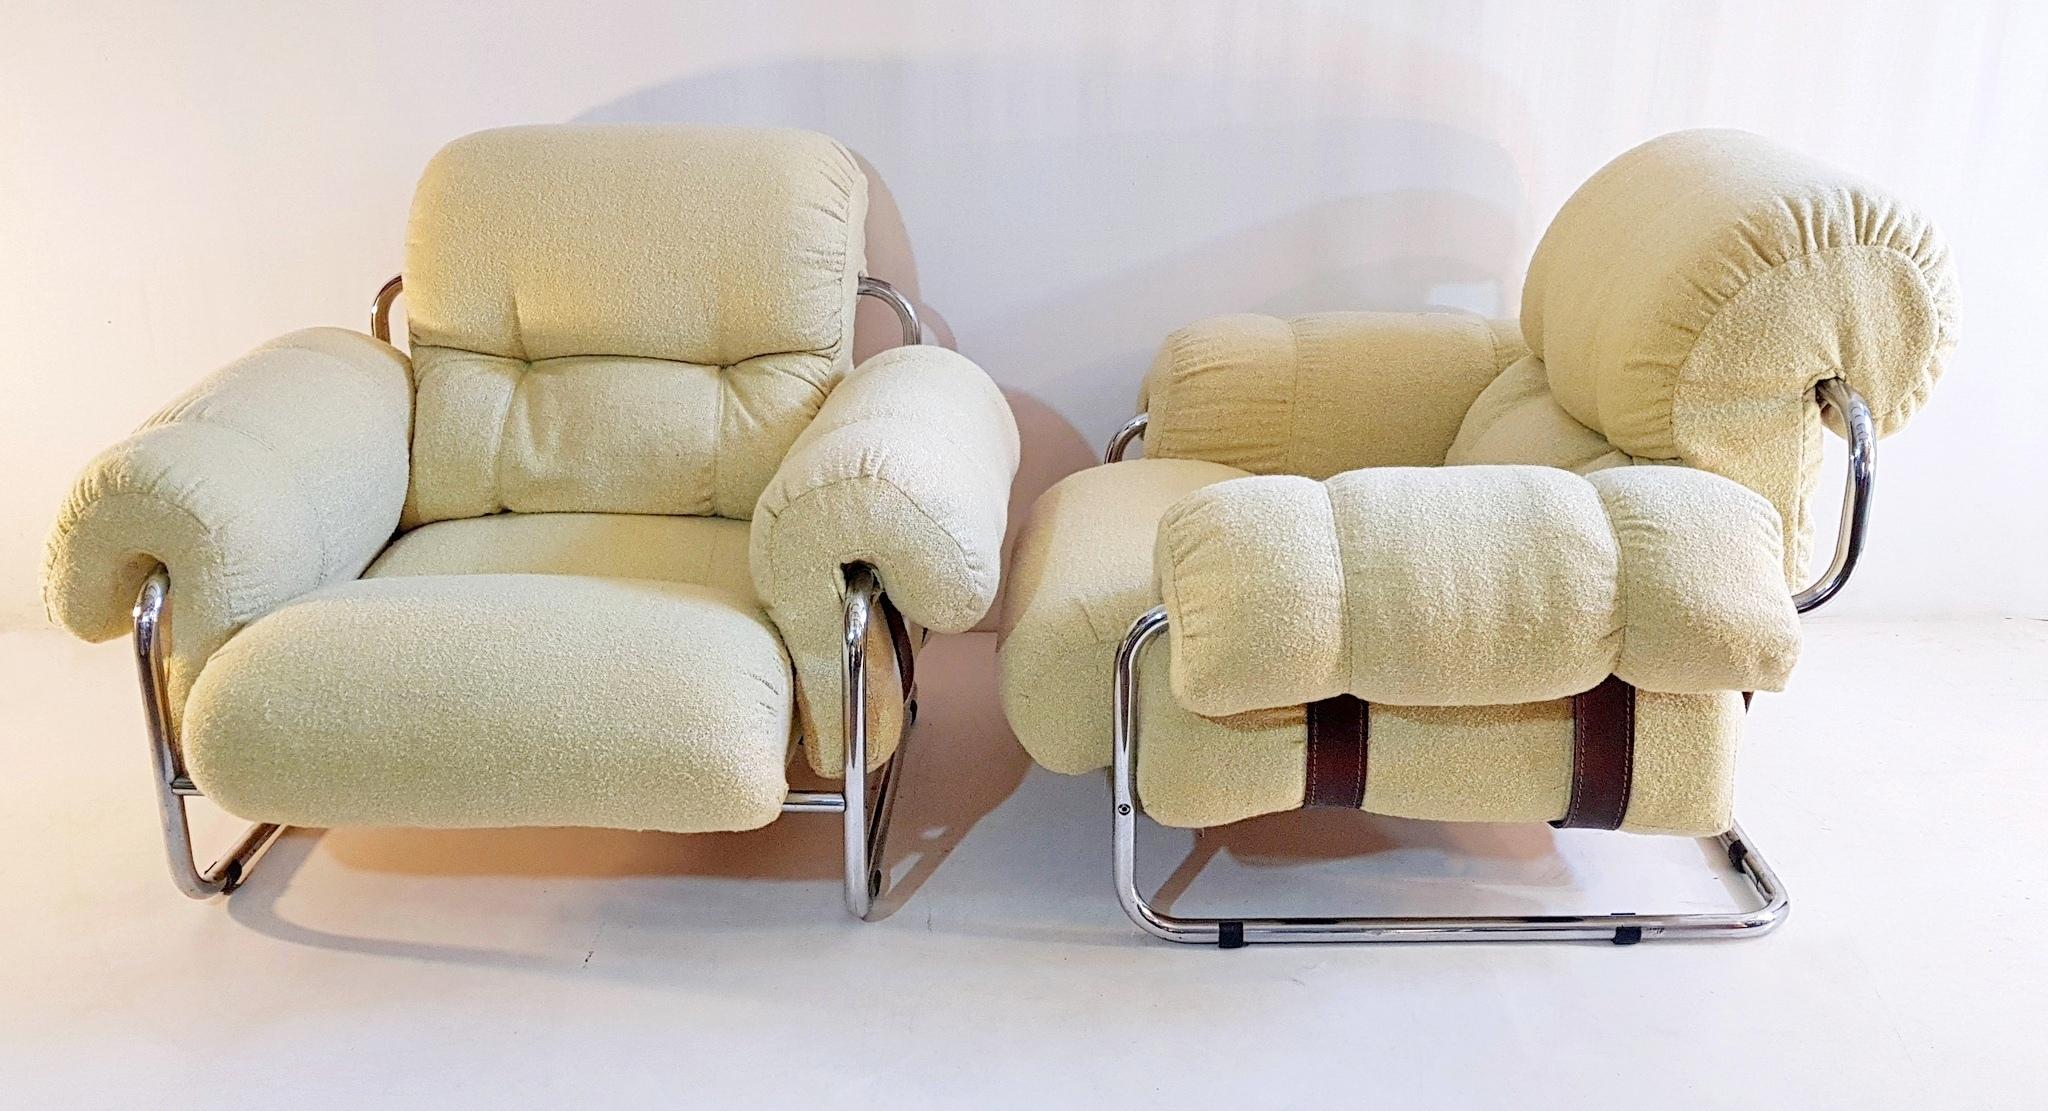 A pair of lounge chairs by Italian designer Guido Faleschini for Mariani, circa 1975. Reupholstered in a soft pale yellow salt and pepper fabric. Some wear to the chrome.
The chrome can be re-finished upon request please ask for quote.